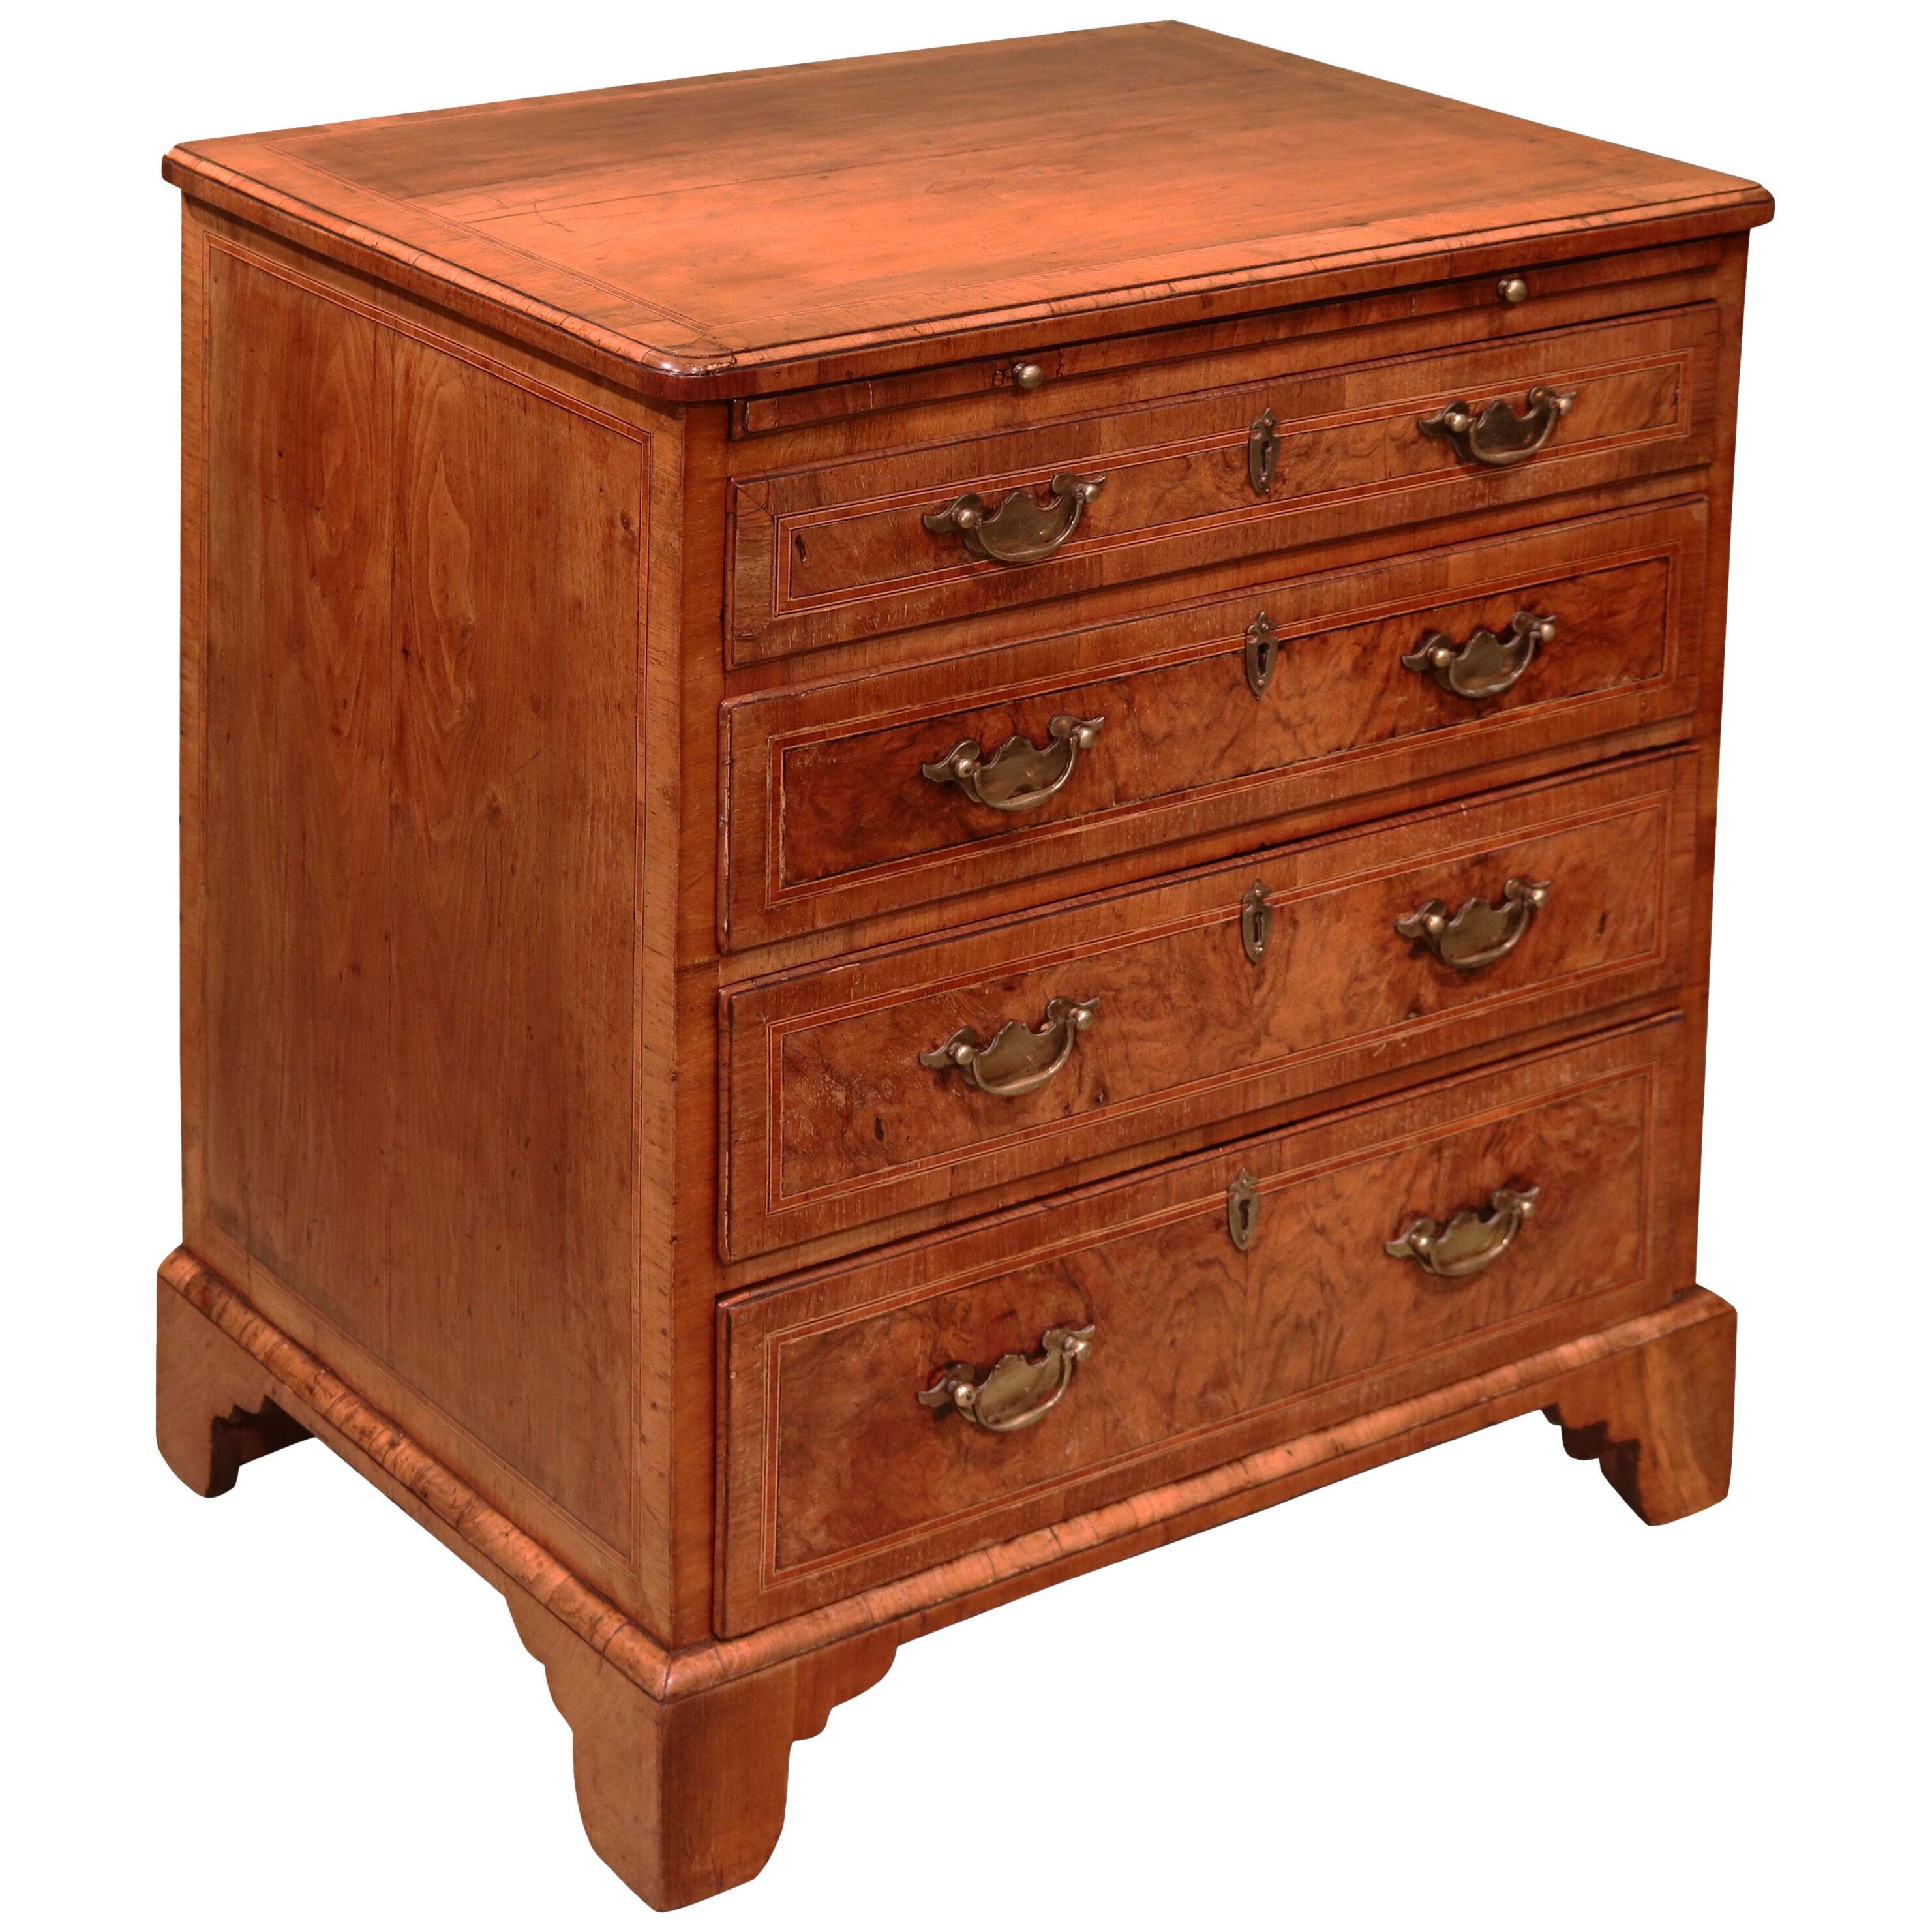 A small George II period walnut chest of drawers